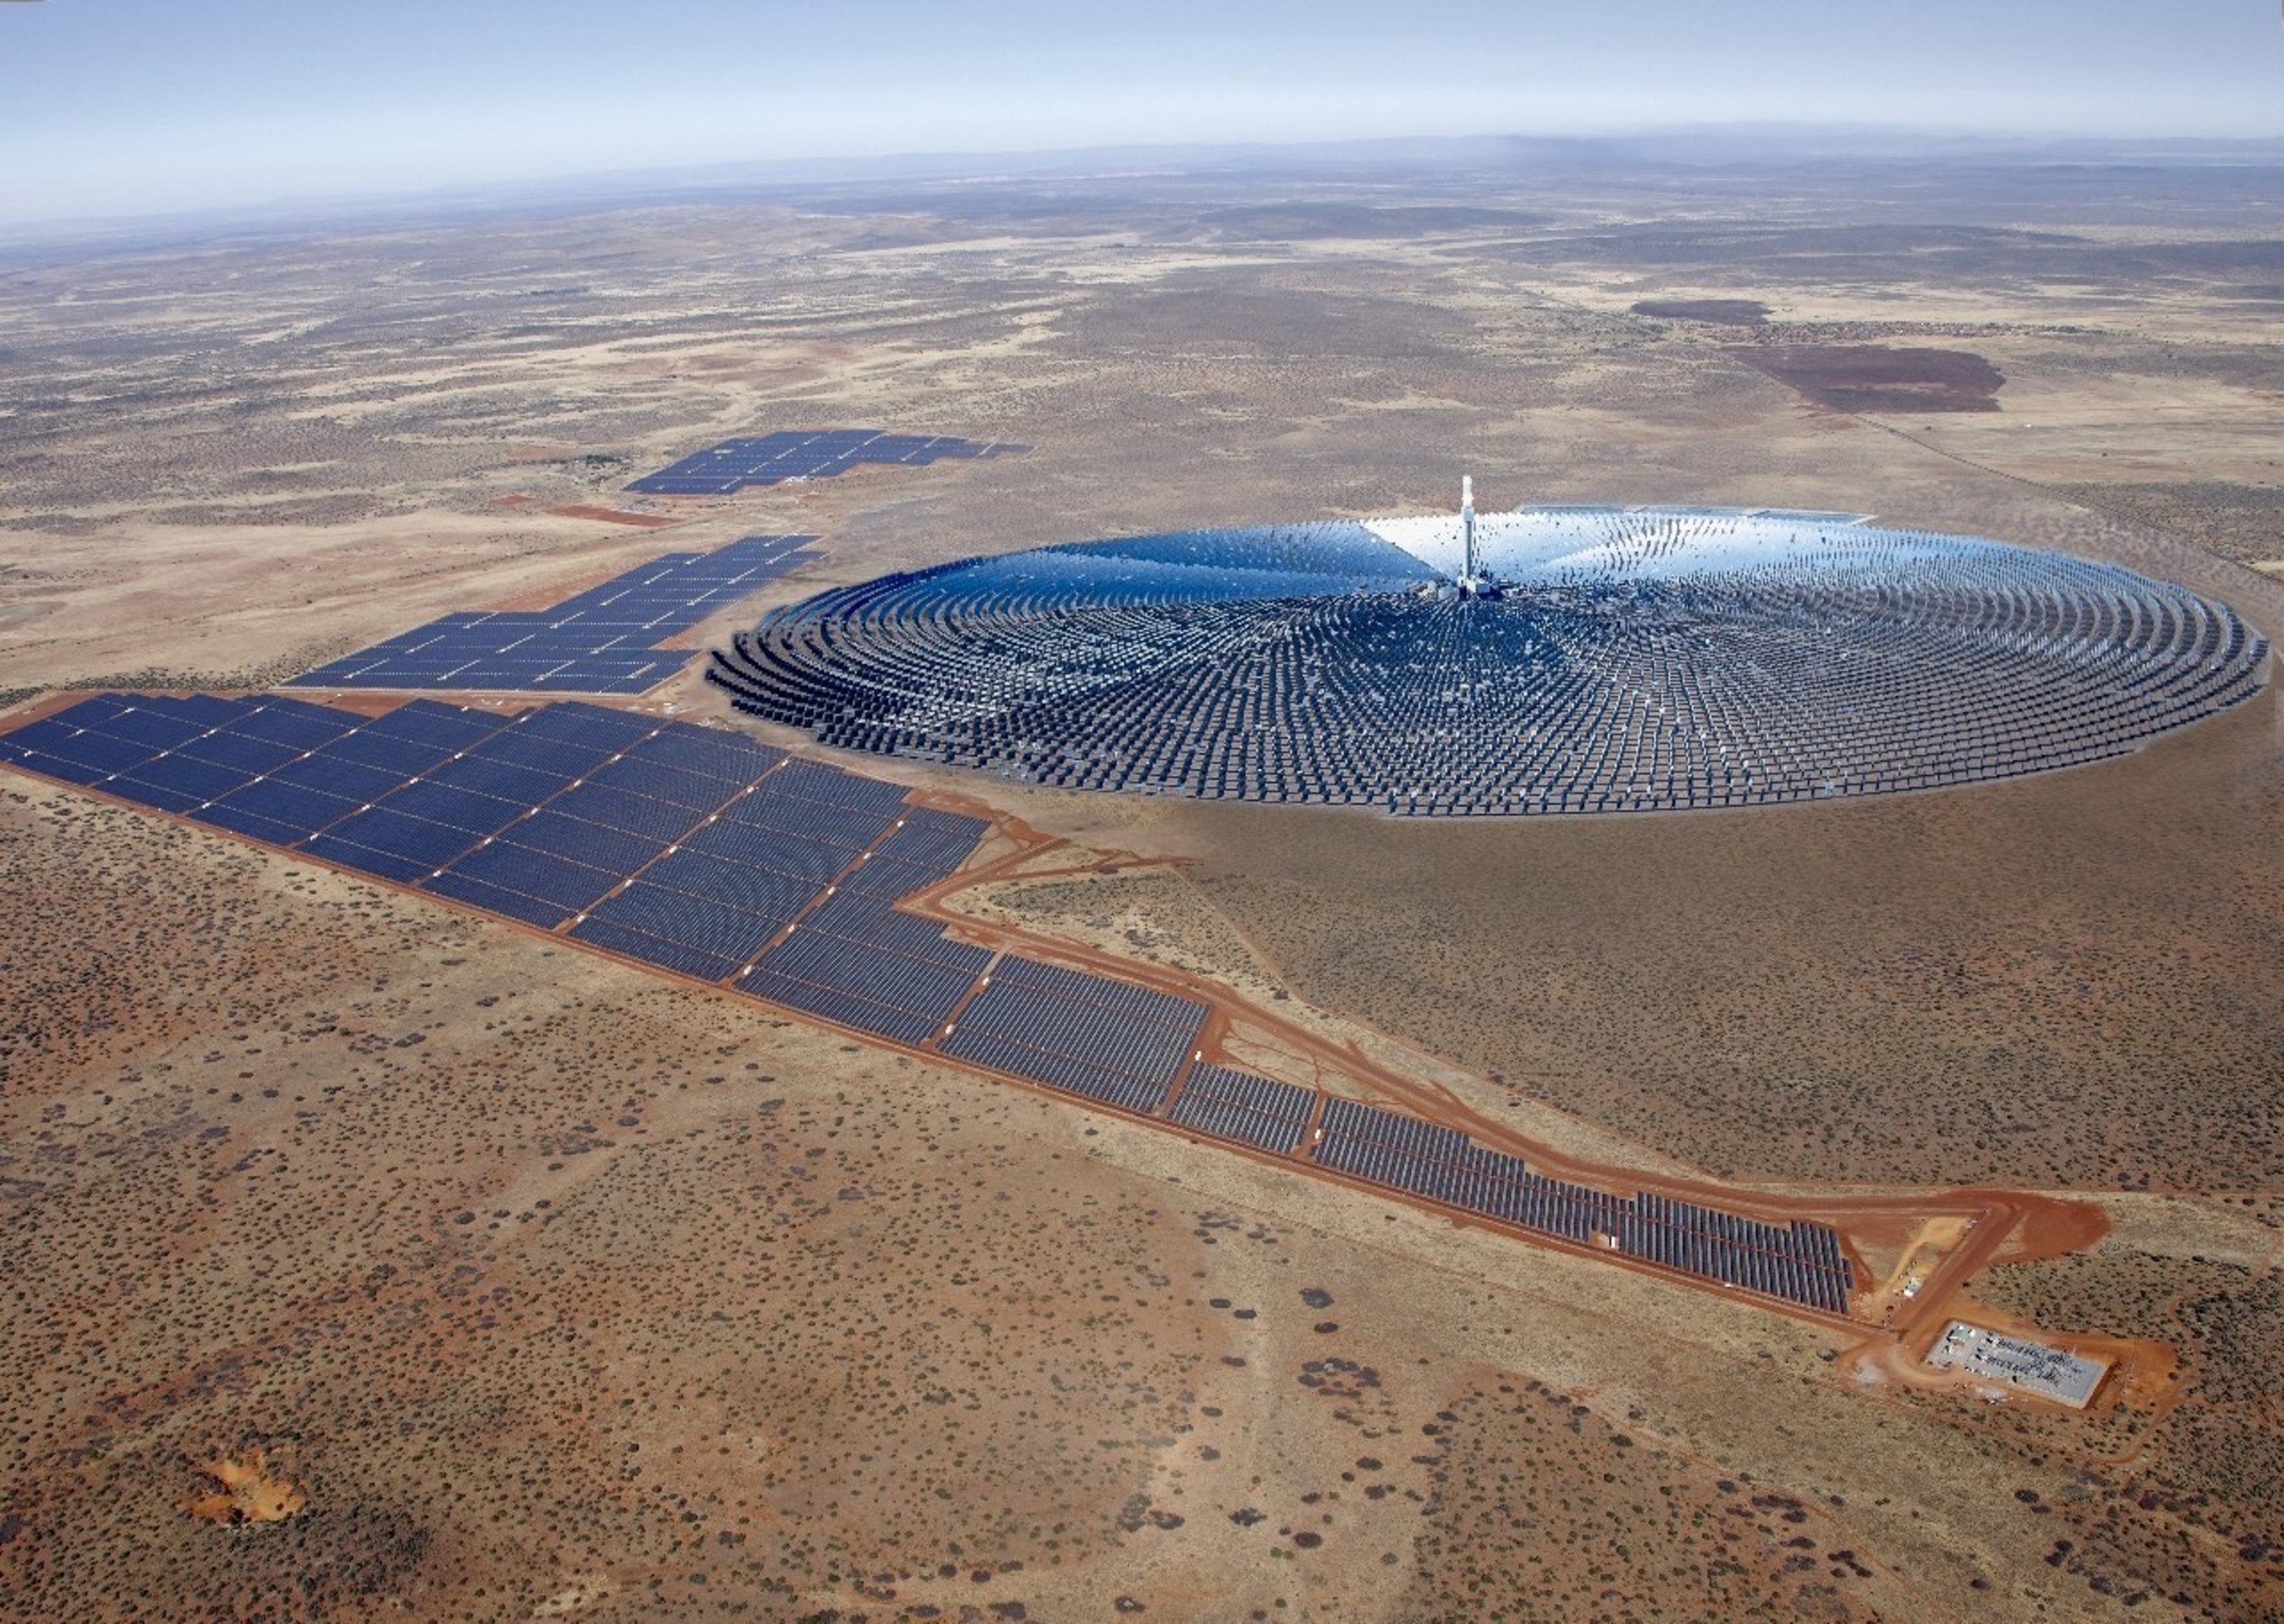 The first of its kind in Africa, the Redstone Solar Thermal Power Project features SolarReserve's world-leading molten salt energy storage technology in a tower configuration with the capability to support South Africa's demand for energy when it's needed most - day and night. The 100 MW project with 12 hours of full-load energy storage will be able to reliably deliver a stable electricity supply to more than 200,000 South African homes during peak demand periods, even well after the sun has set.